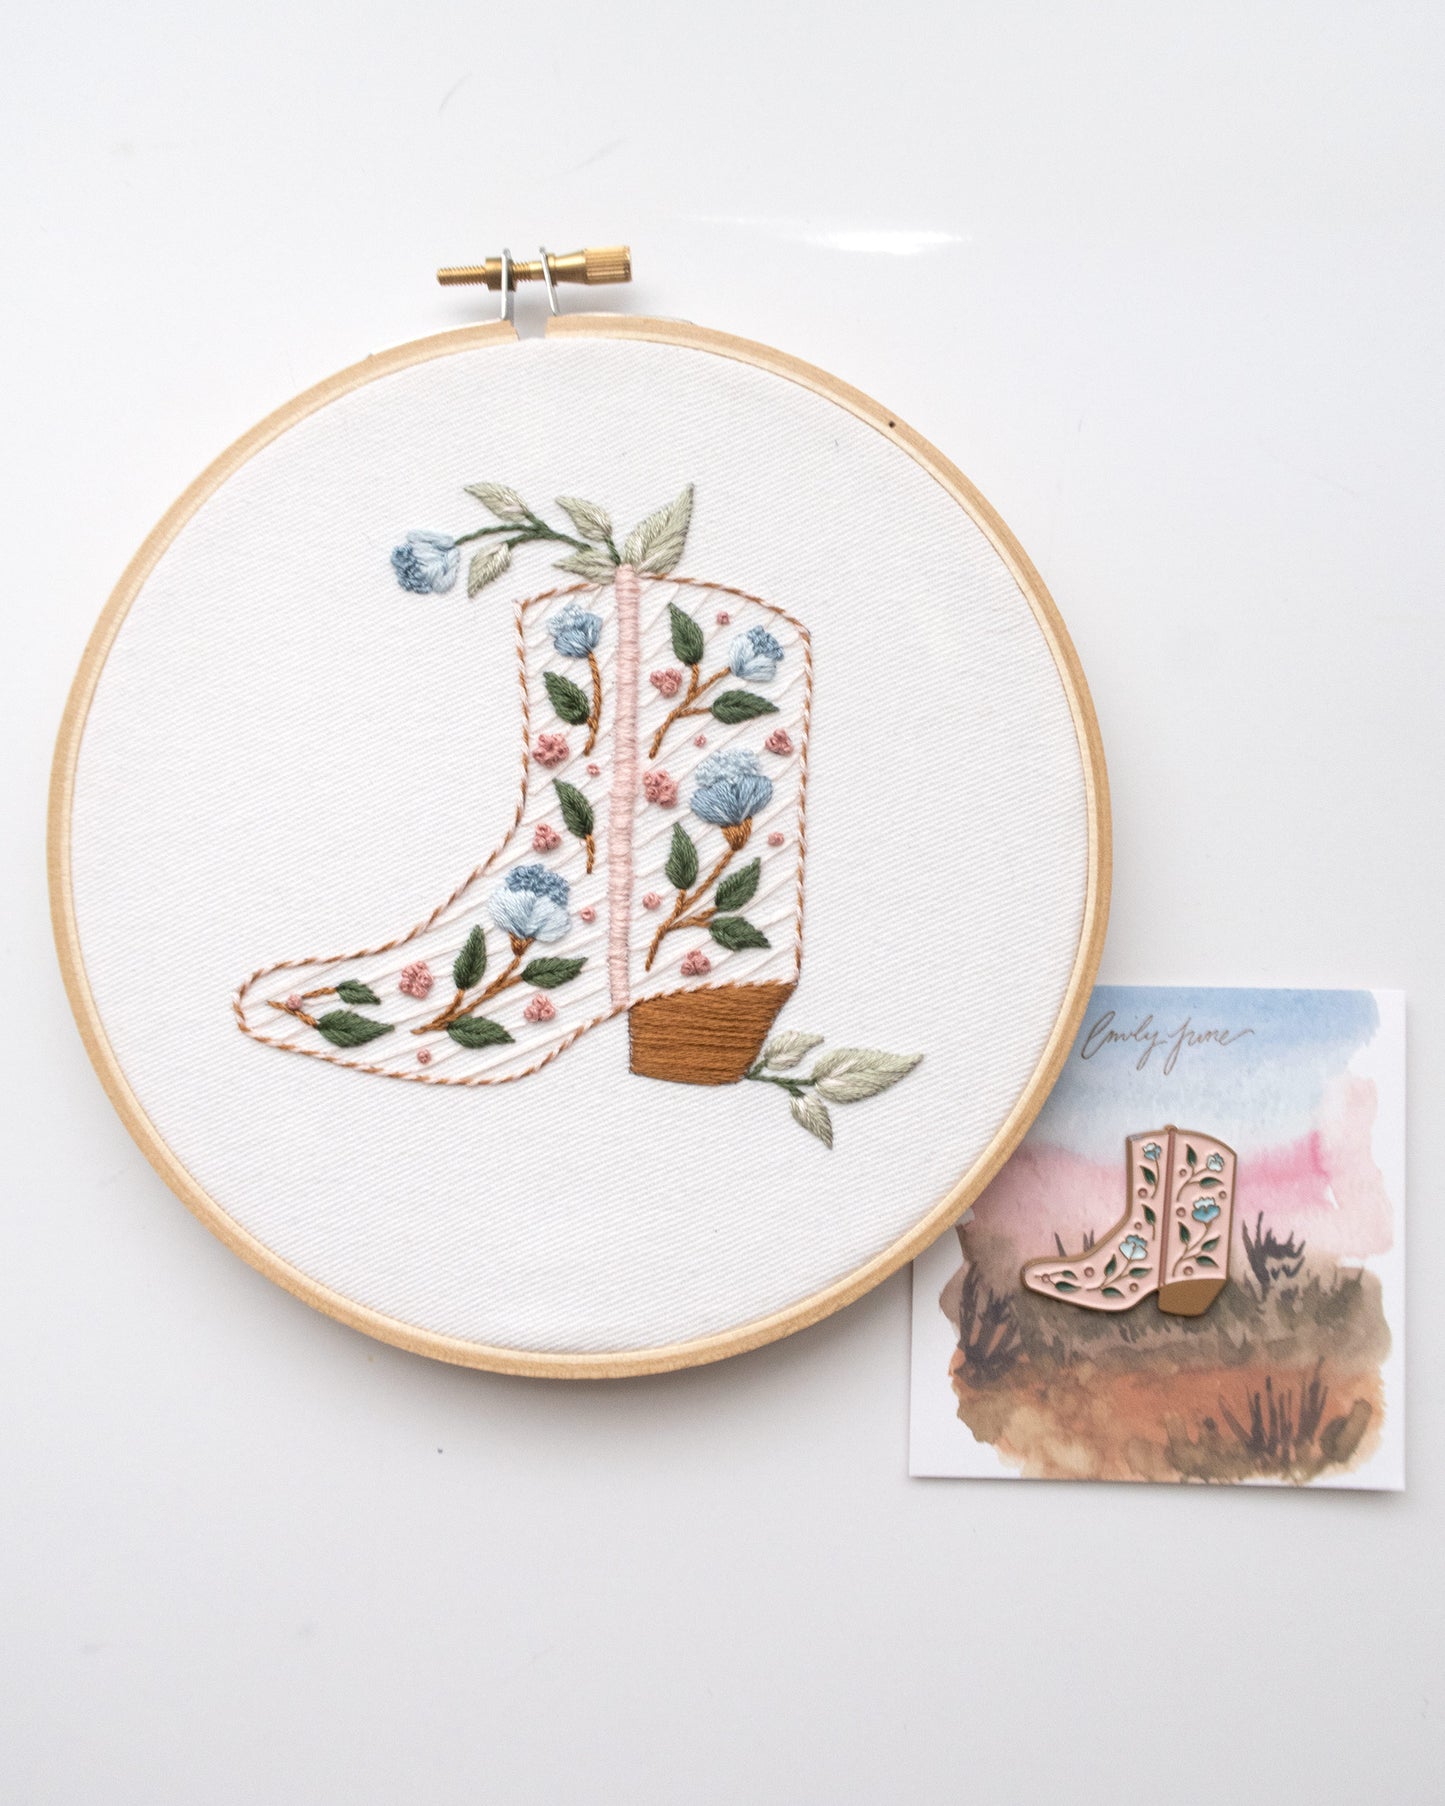 Southwest themed embroidery bundle with embroidery kit that includes wood embroidery hoop, printed embroidery fabric, embroidery needle, embroidery floss, and embroidery guide, and pink cowboy boot enamel needle nanny or needle minder